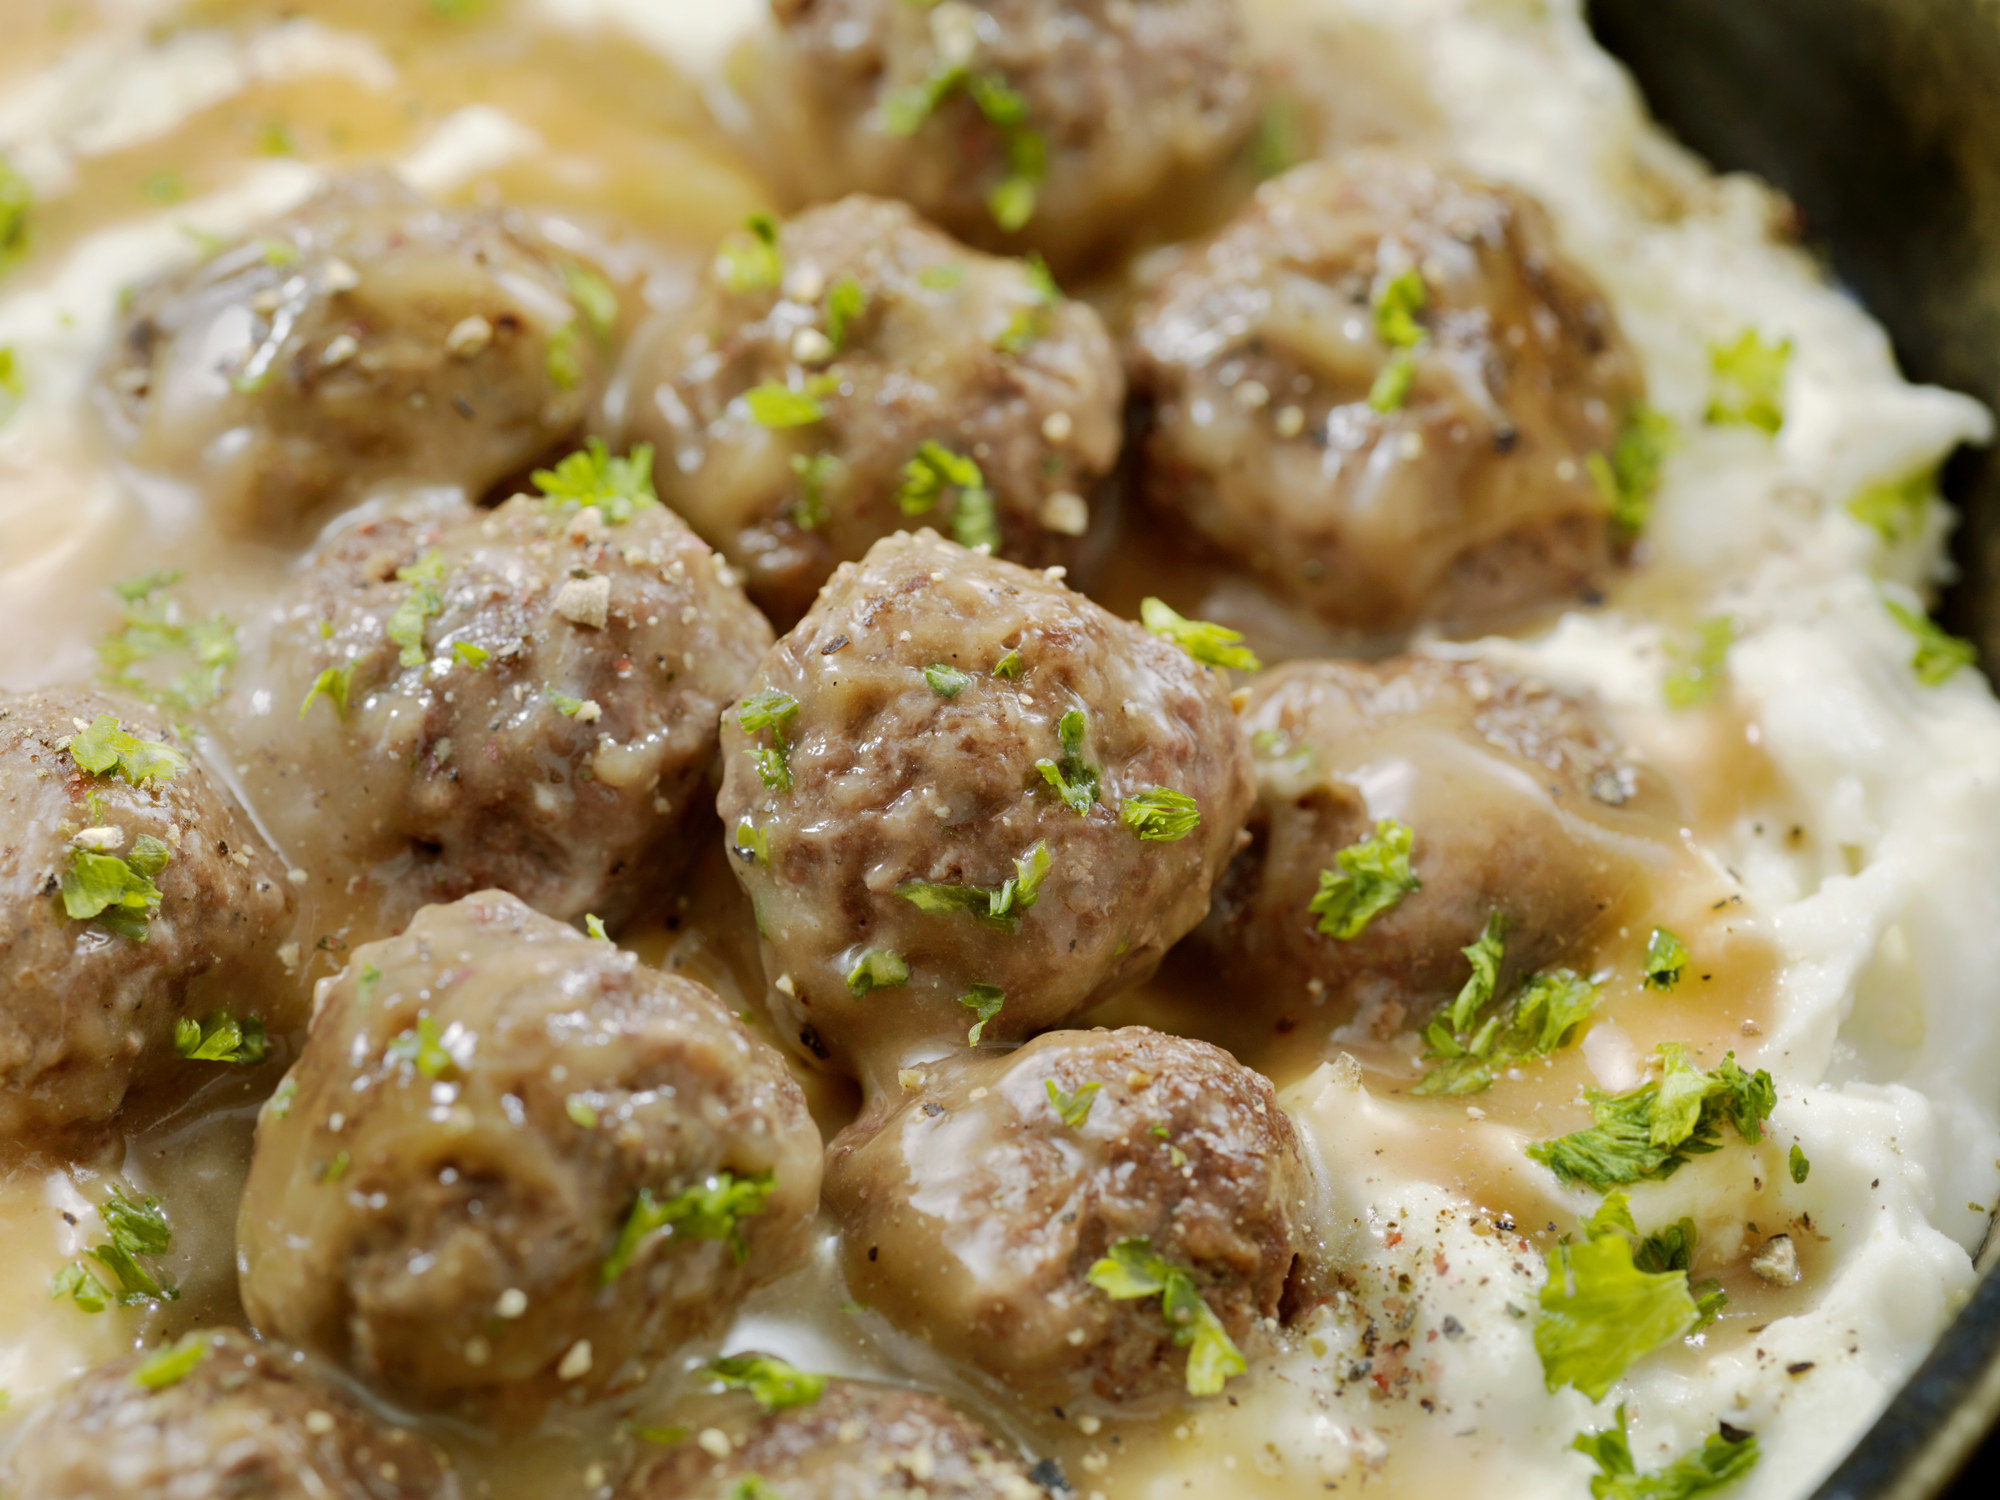 Meatballs in gravy over mashed potatoes.